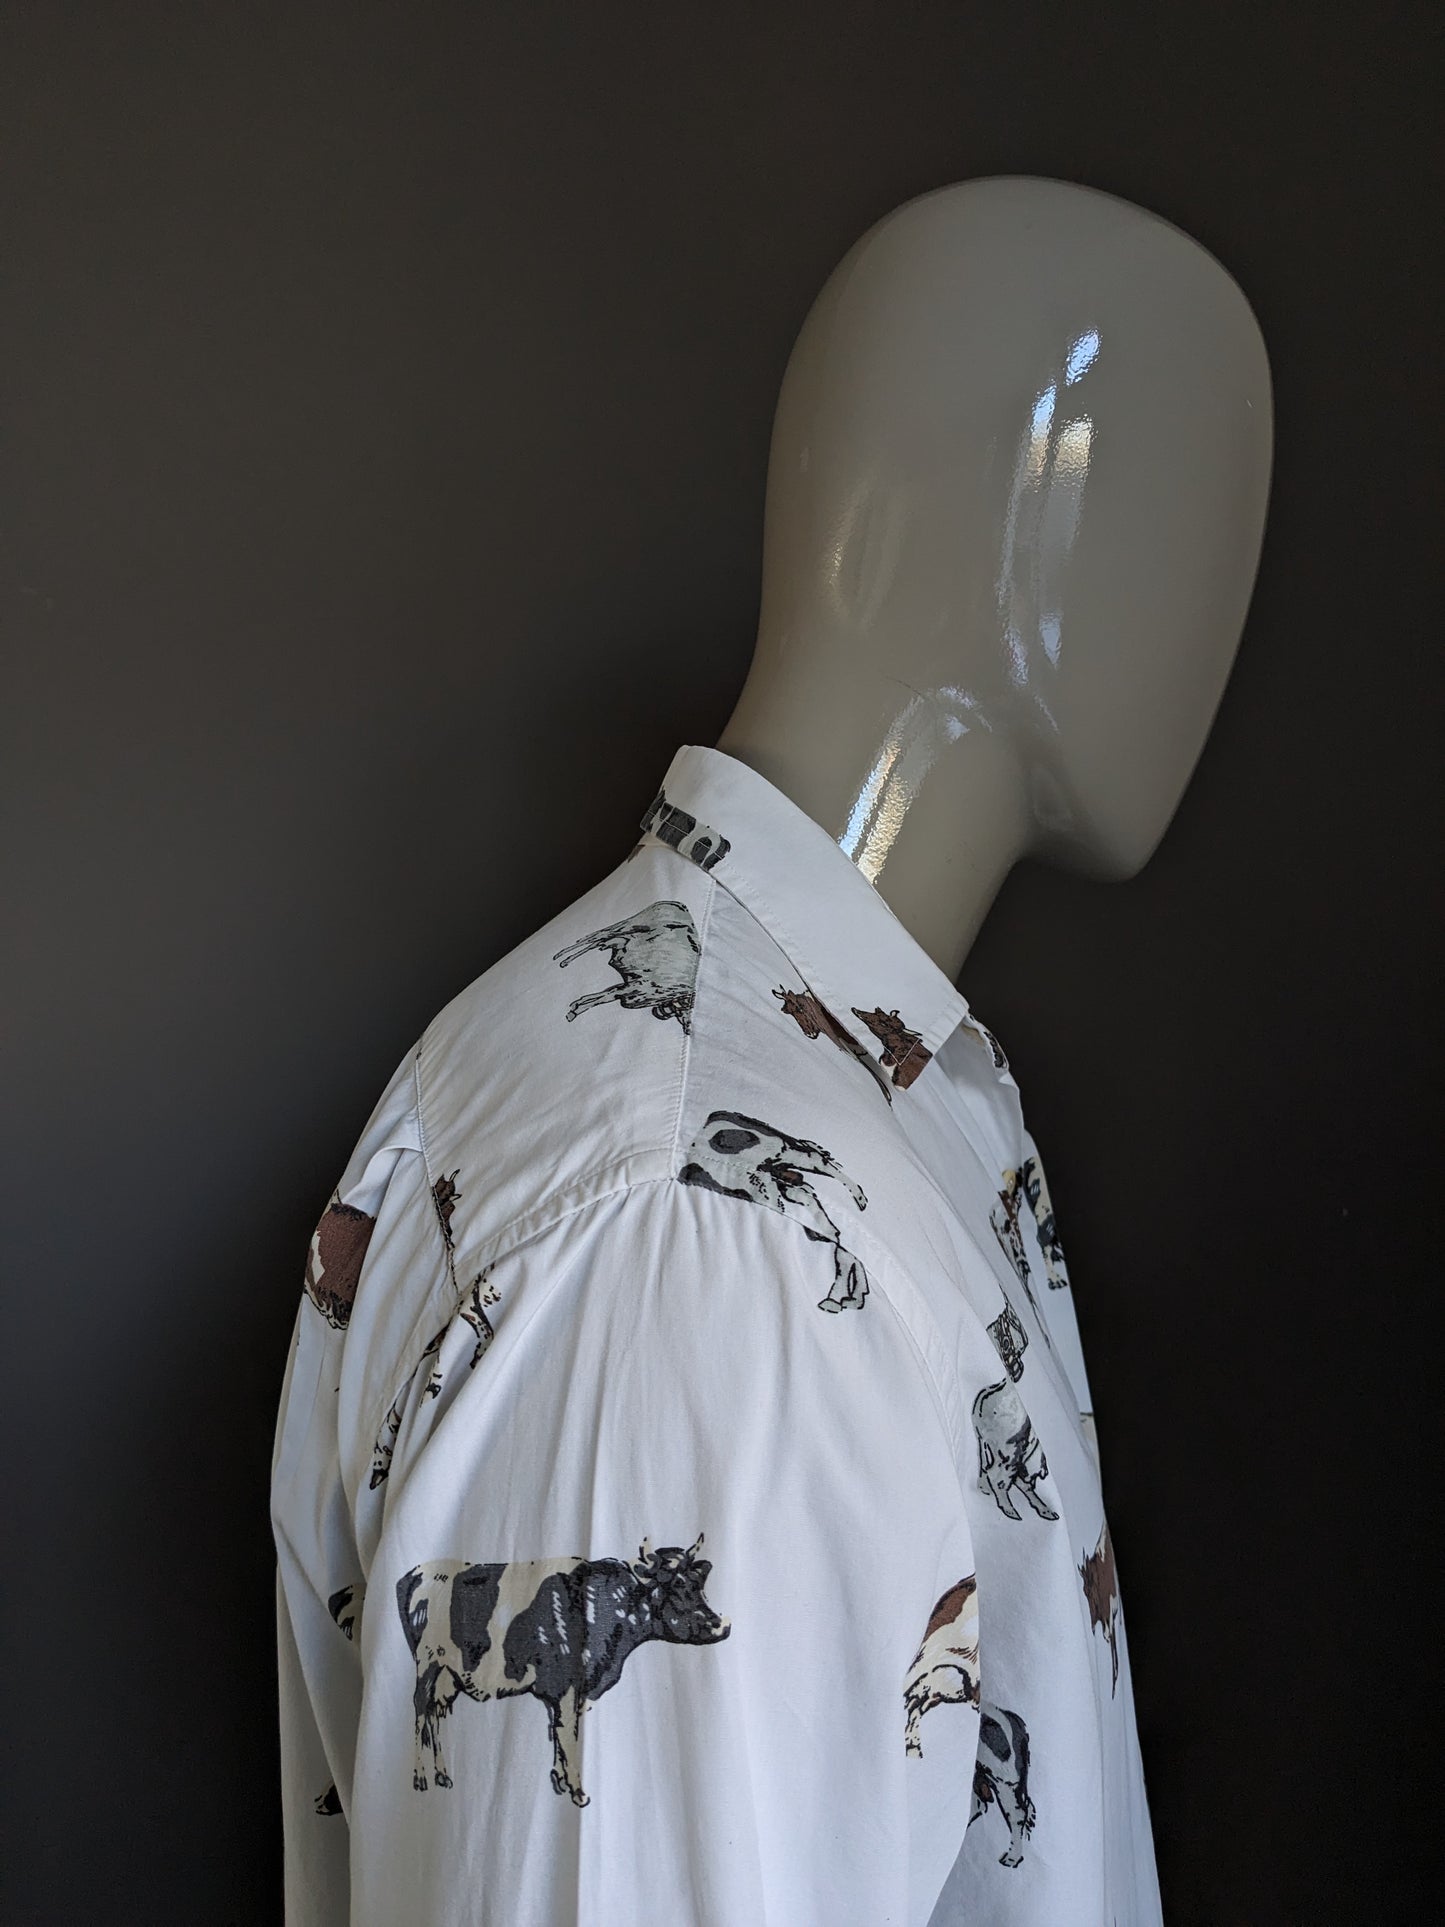 Vintage Nara Camice shirt. White with brown gray cows print. Size L.